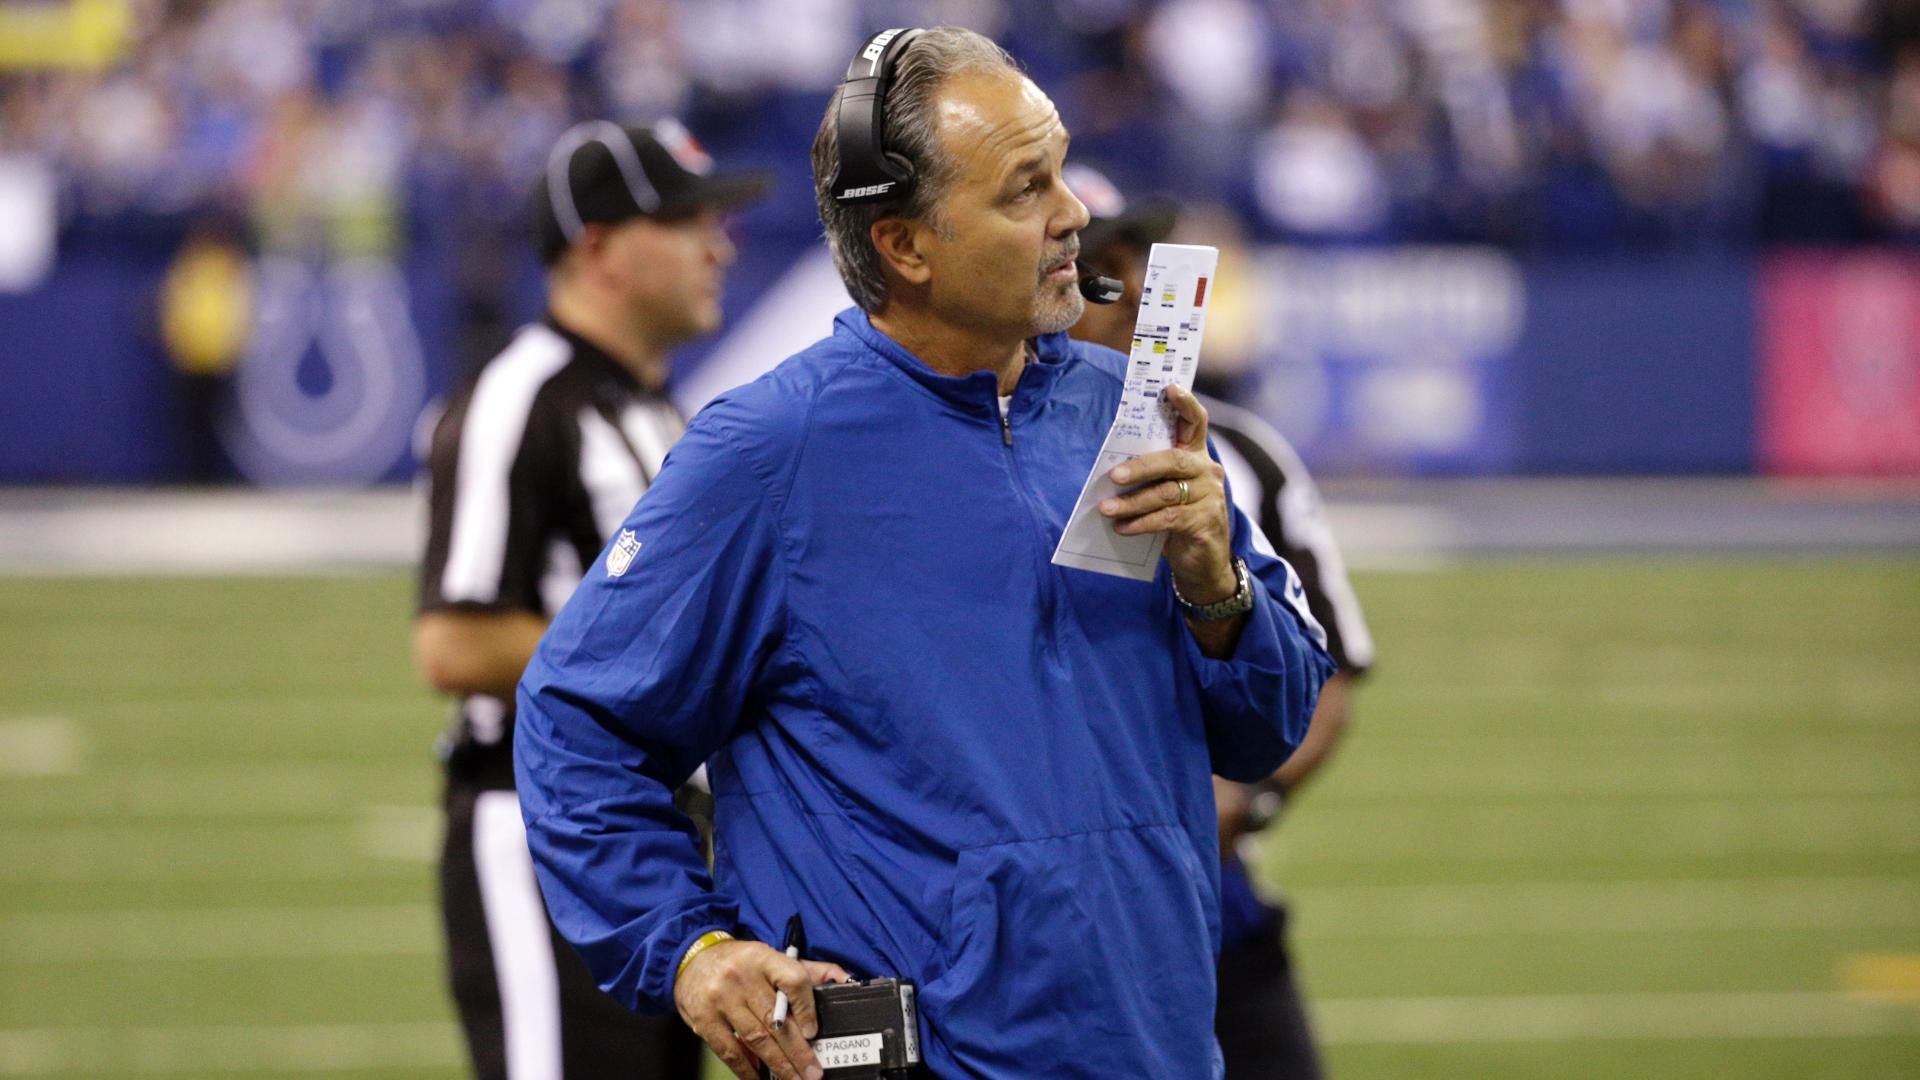 Is Pagano's job in jeopardy after dud play?